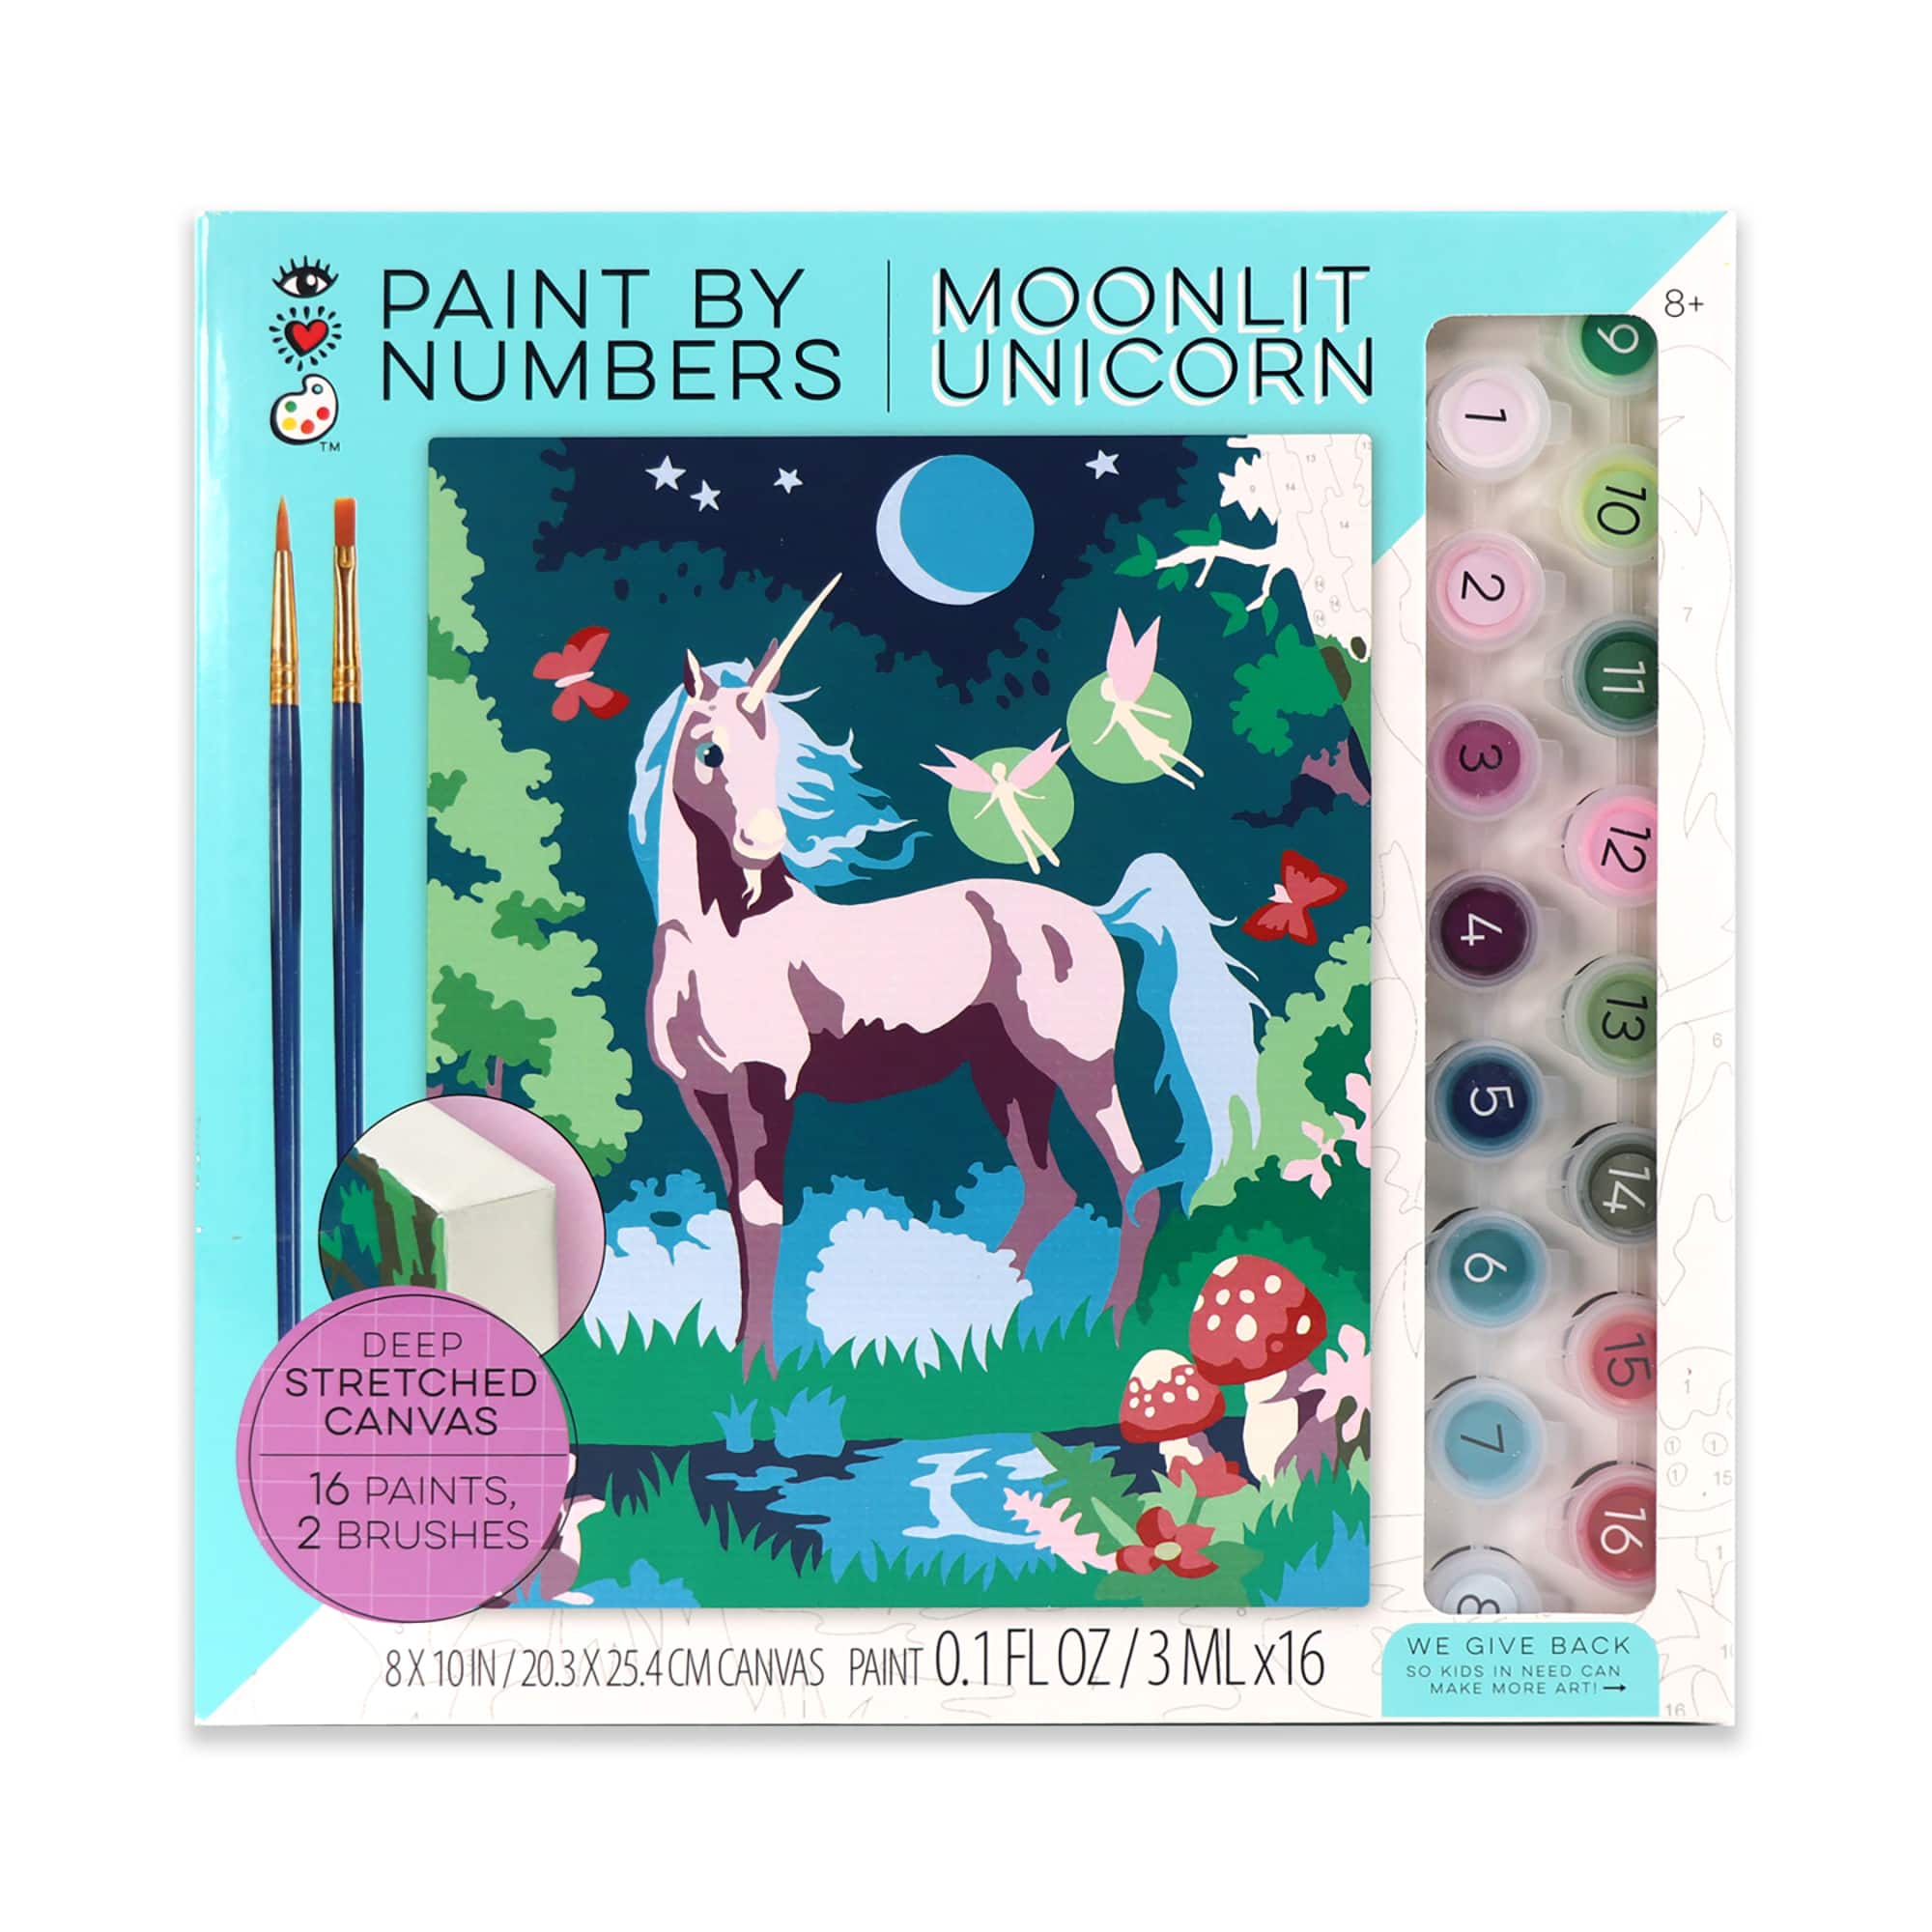 Paint by Numbers Moonlit Unicorn Craft Kit